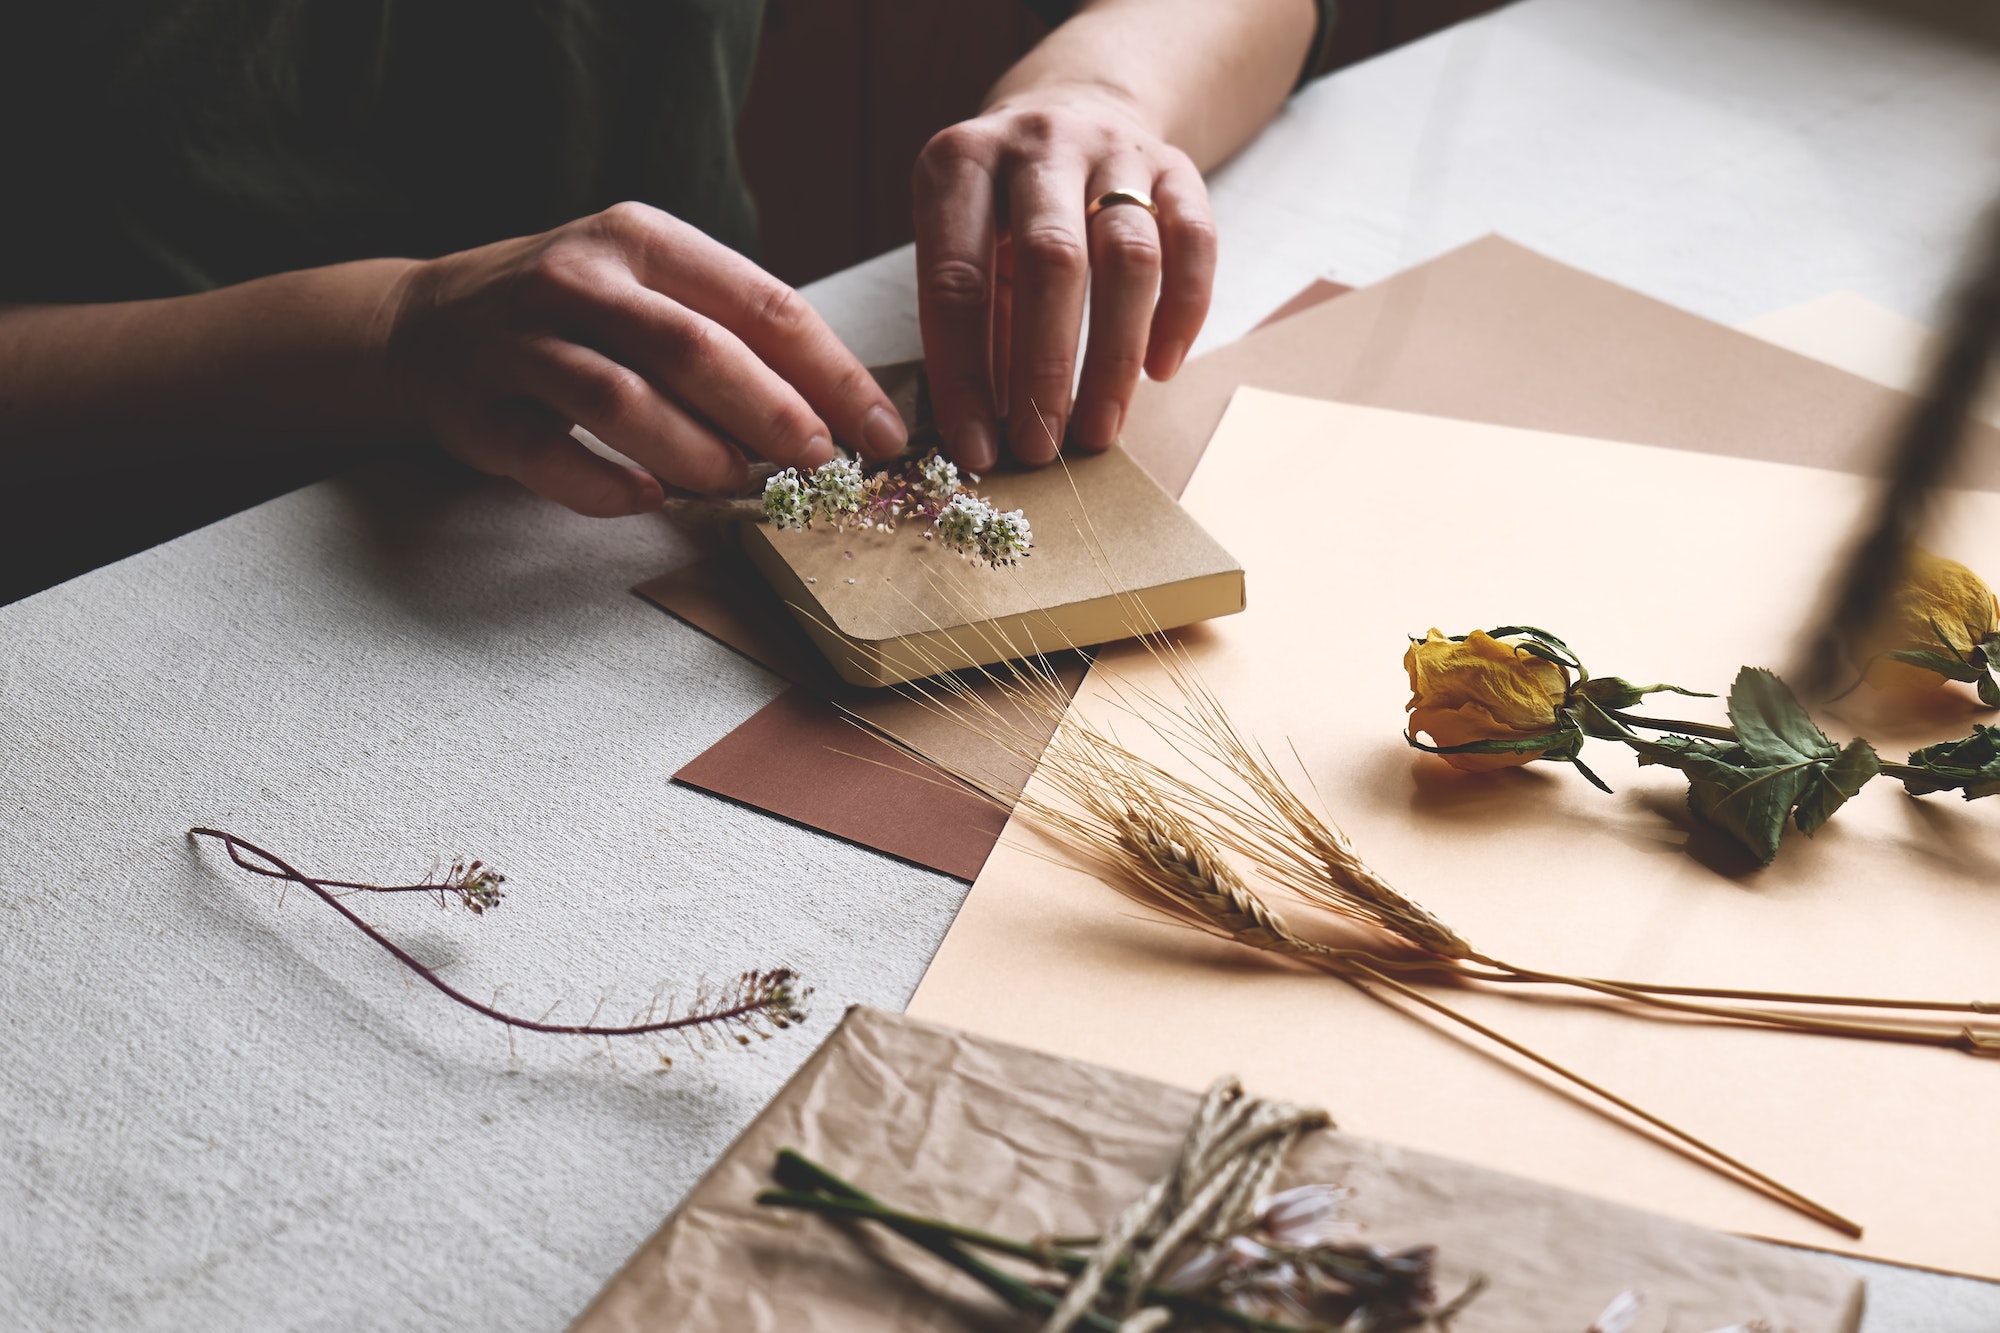 Woman makes trendy hand made gift package with craft recycled paper and dried flowers.